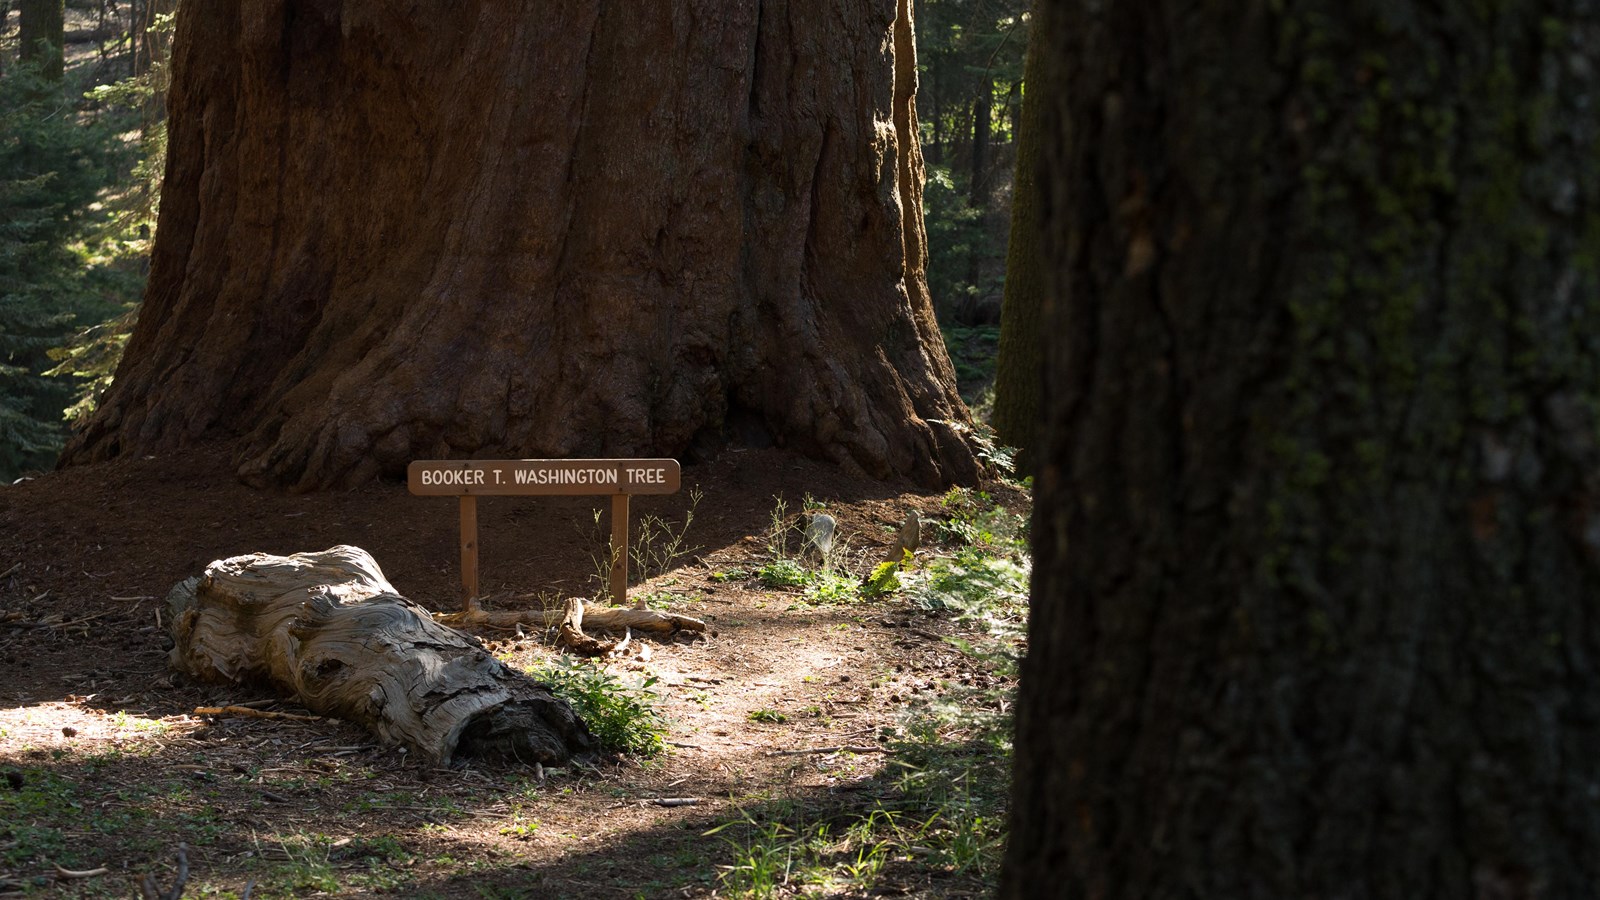 A wooden sign labeled after Booker T. Washington sits in front of a large Giant Sequoia Tree